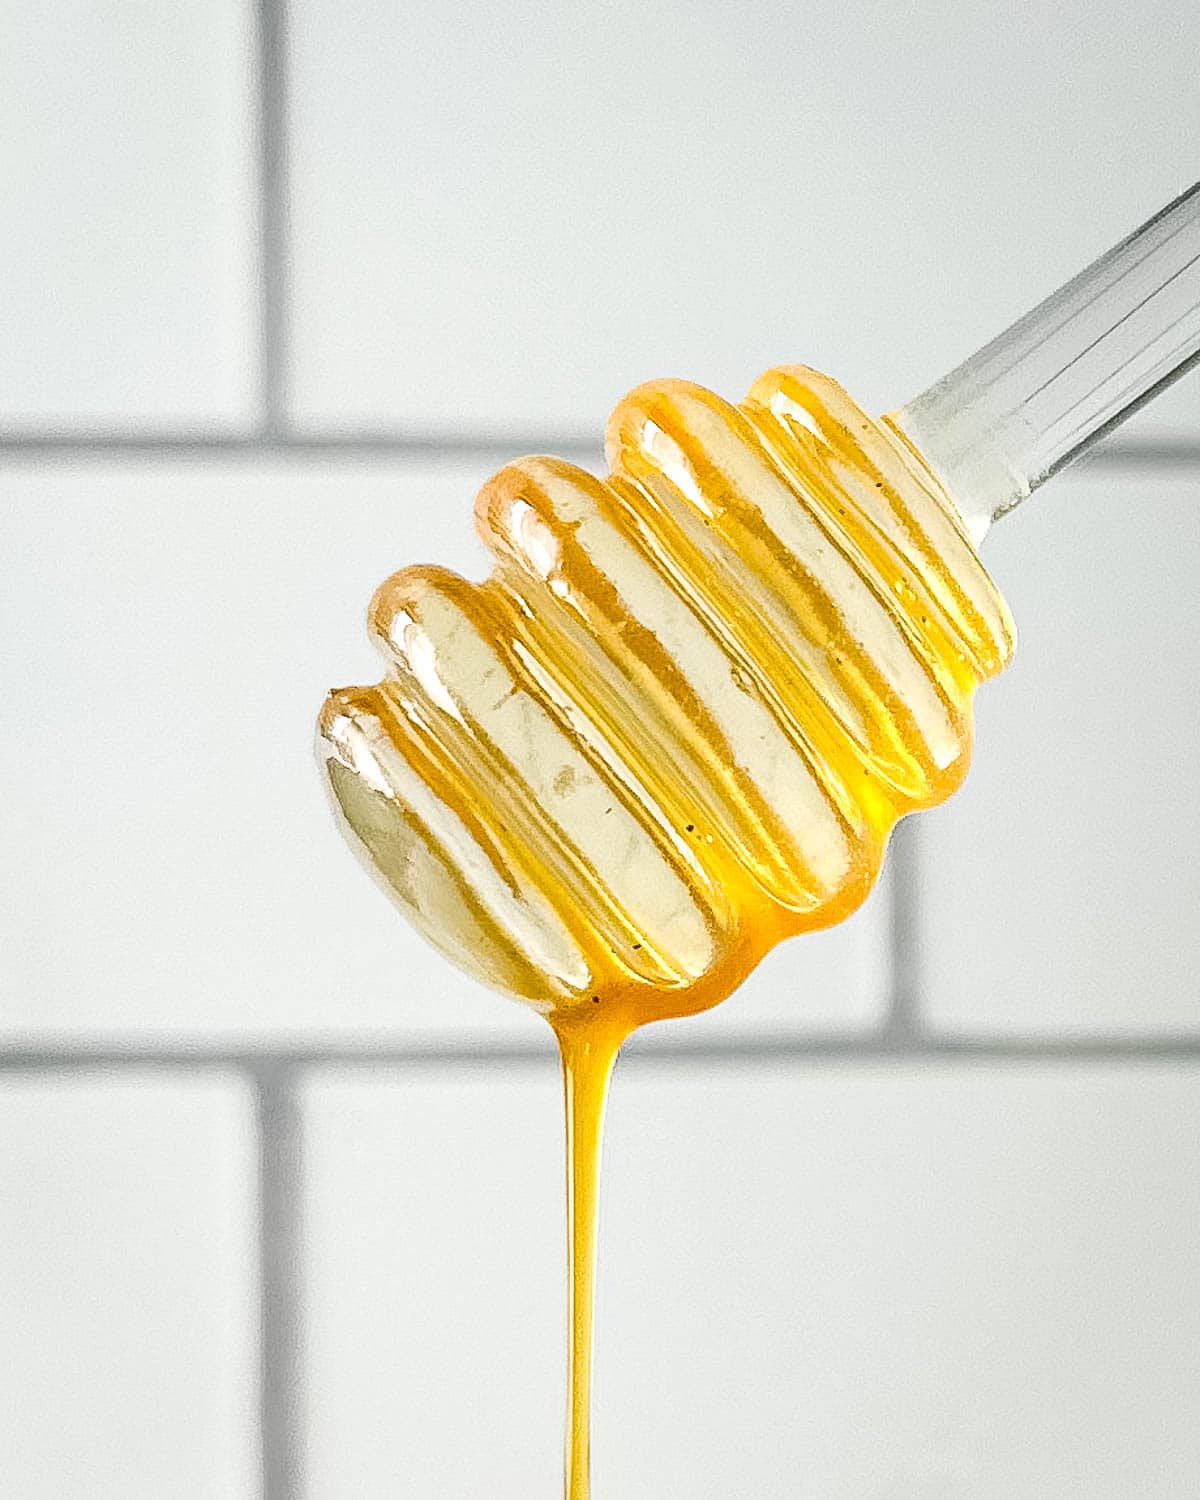 Closeup of honey dipper dripping hot honey sauce in front of a white subway tile wall.